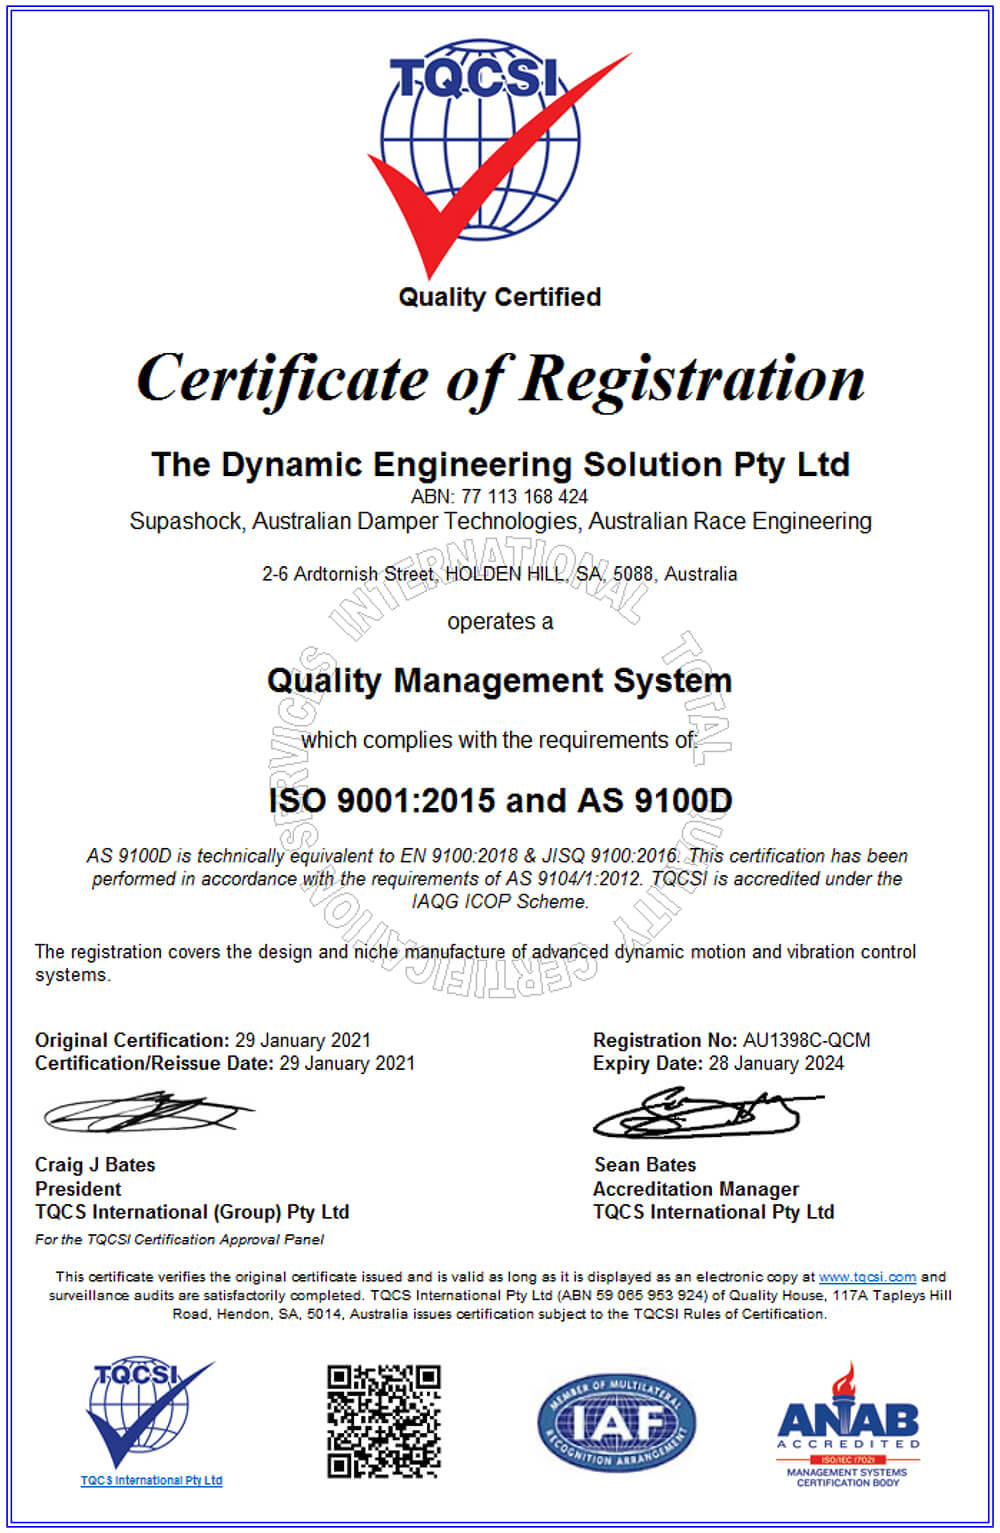 Supashock Defence AS 9100D and ISO 9001-2015